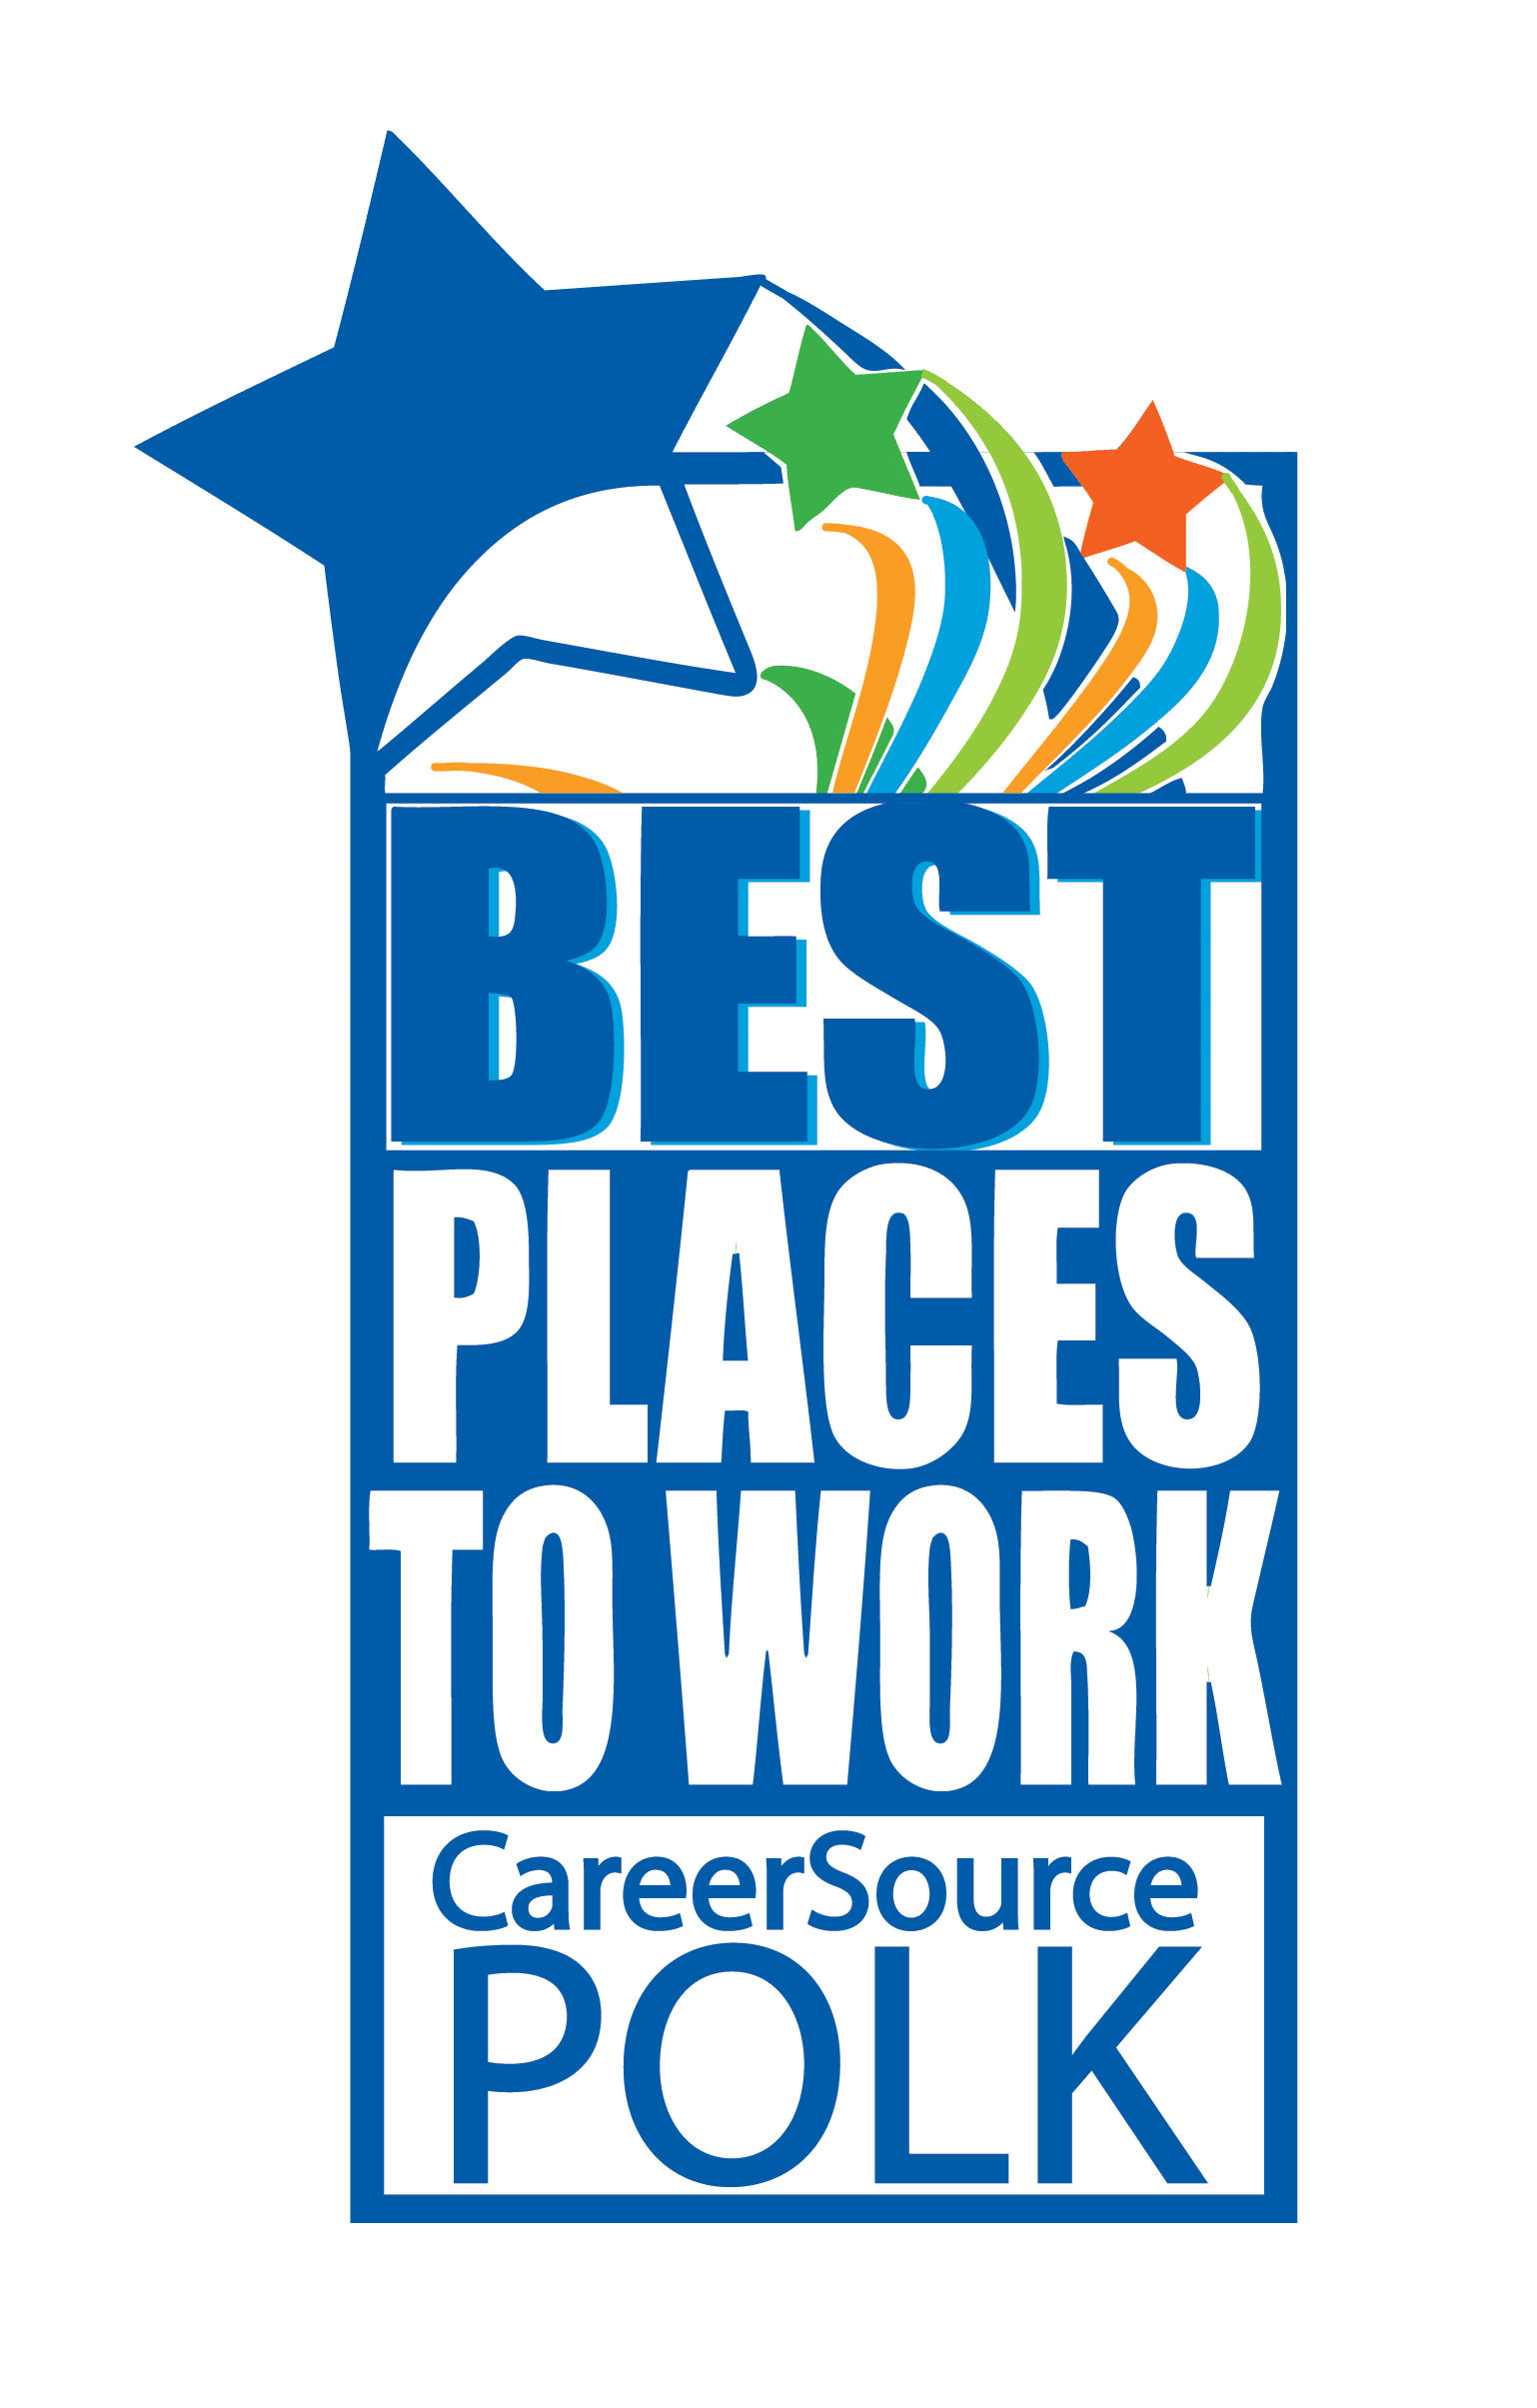 CareerSource Polk - Best Places to Work